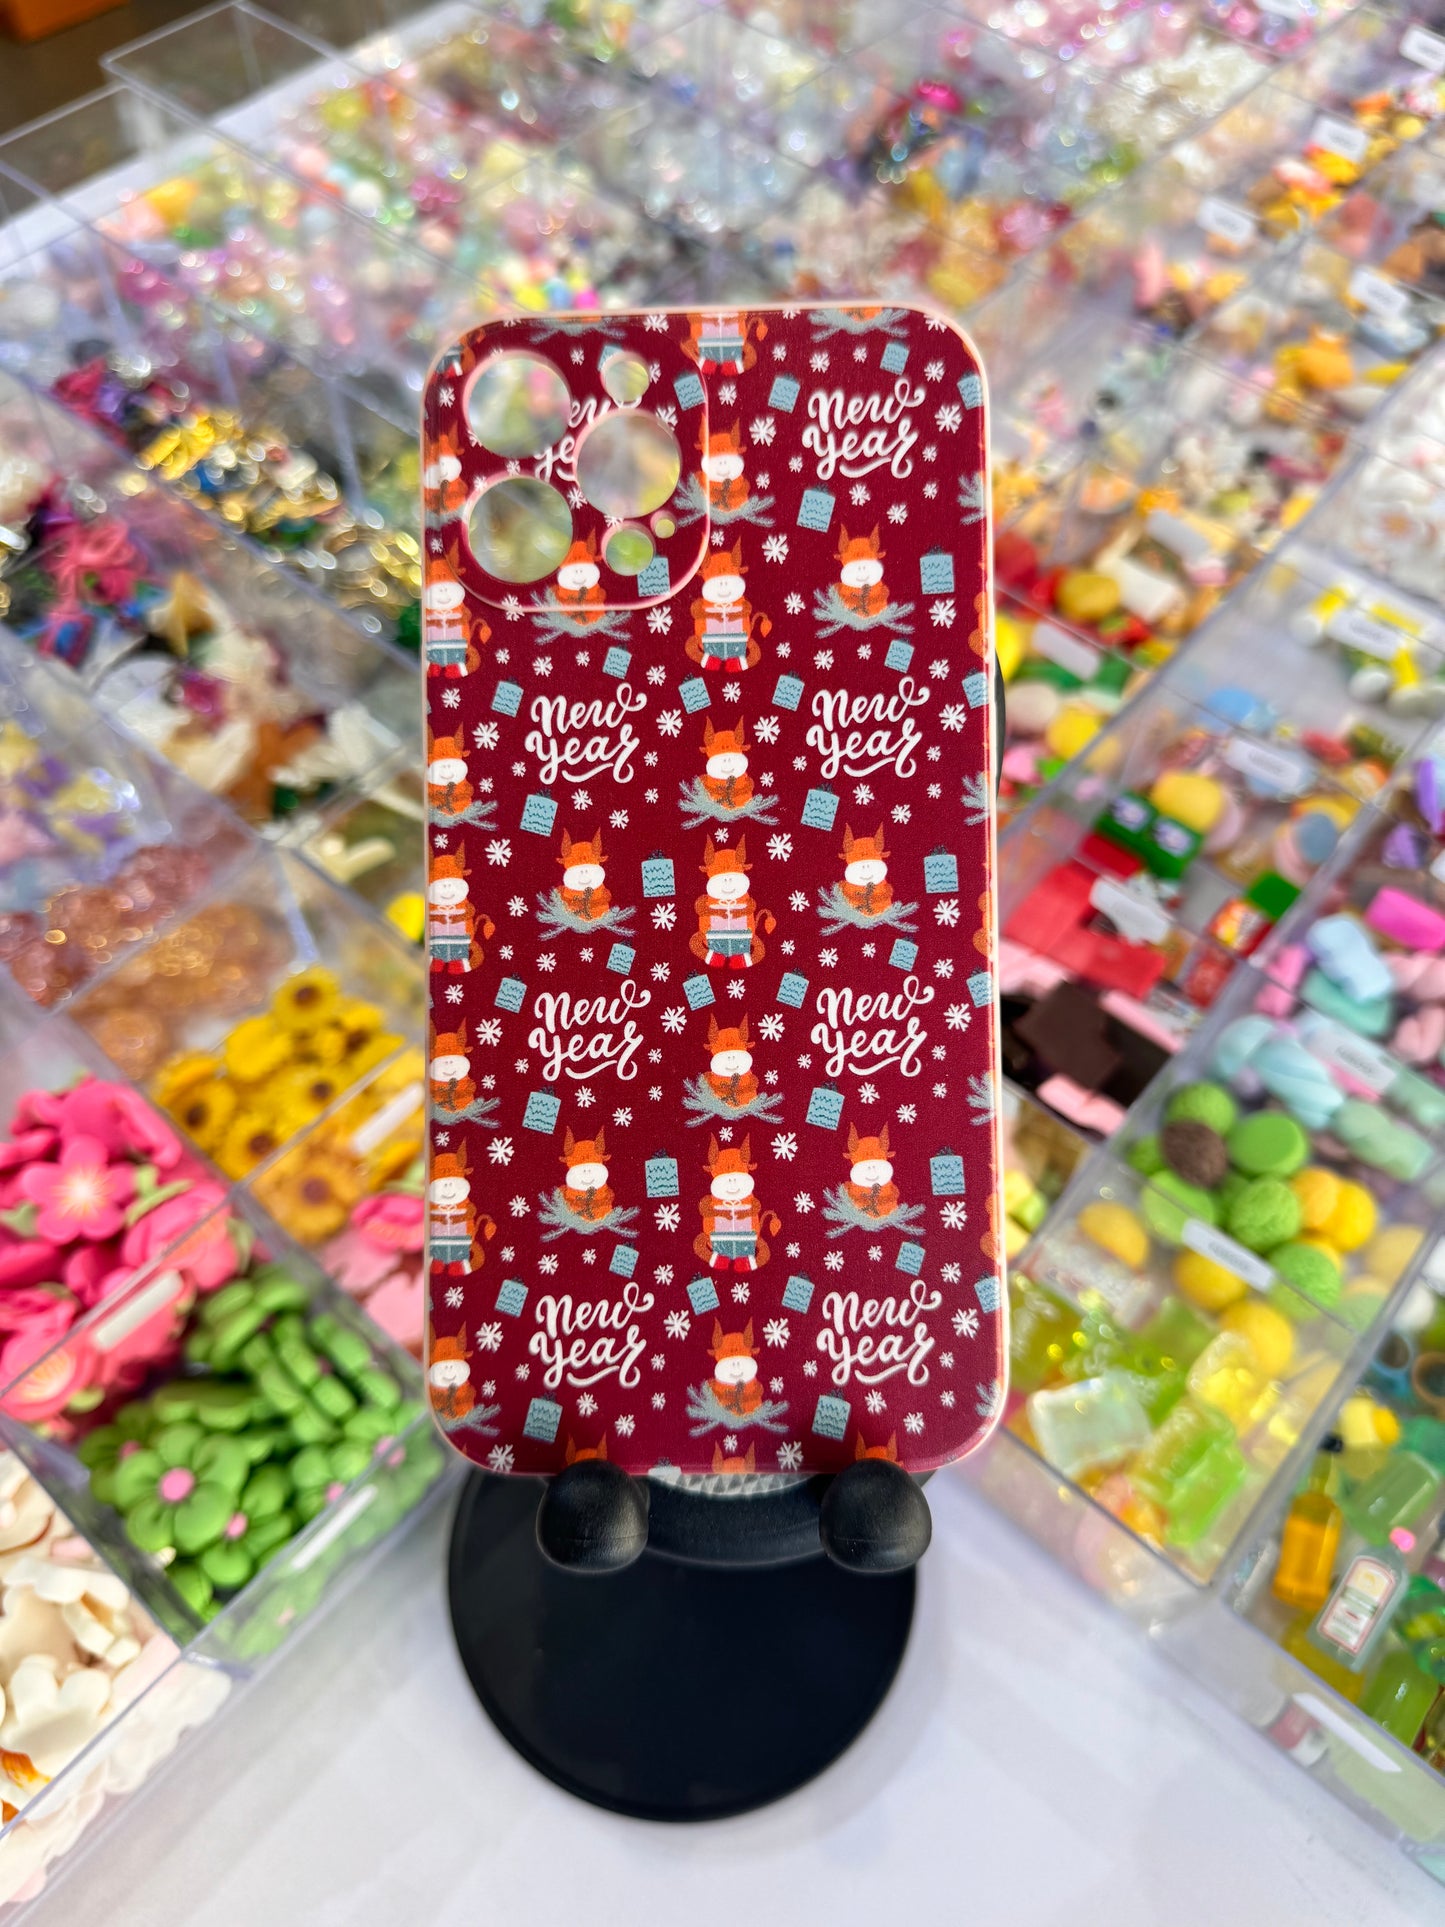 New year Case For IPhones